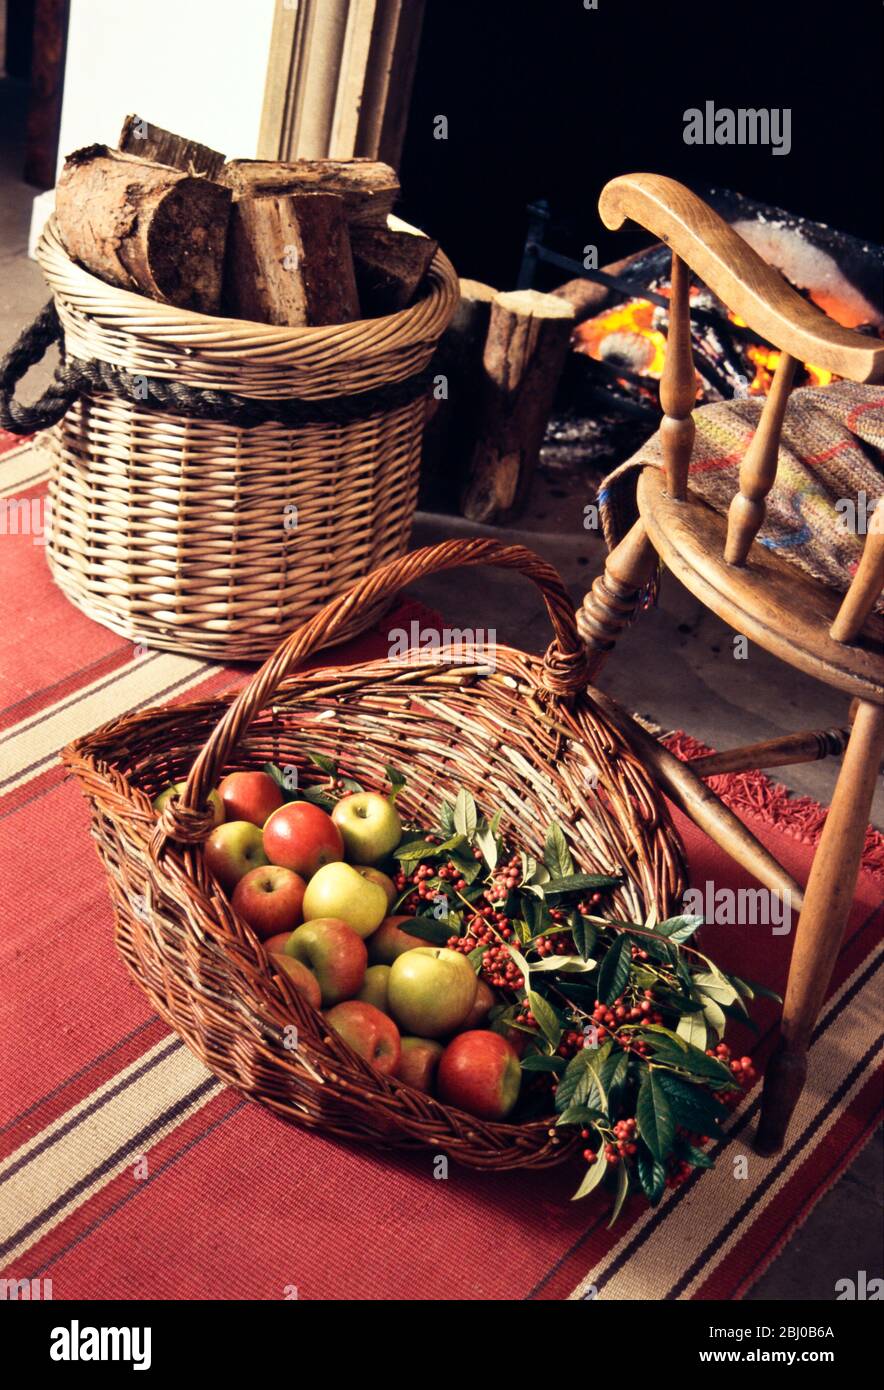 Big decorative basket of Cox's apples with sprays of ornamental berries by open fireplace with old fashioned chair and log basket - Stock Photo